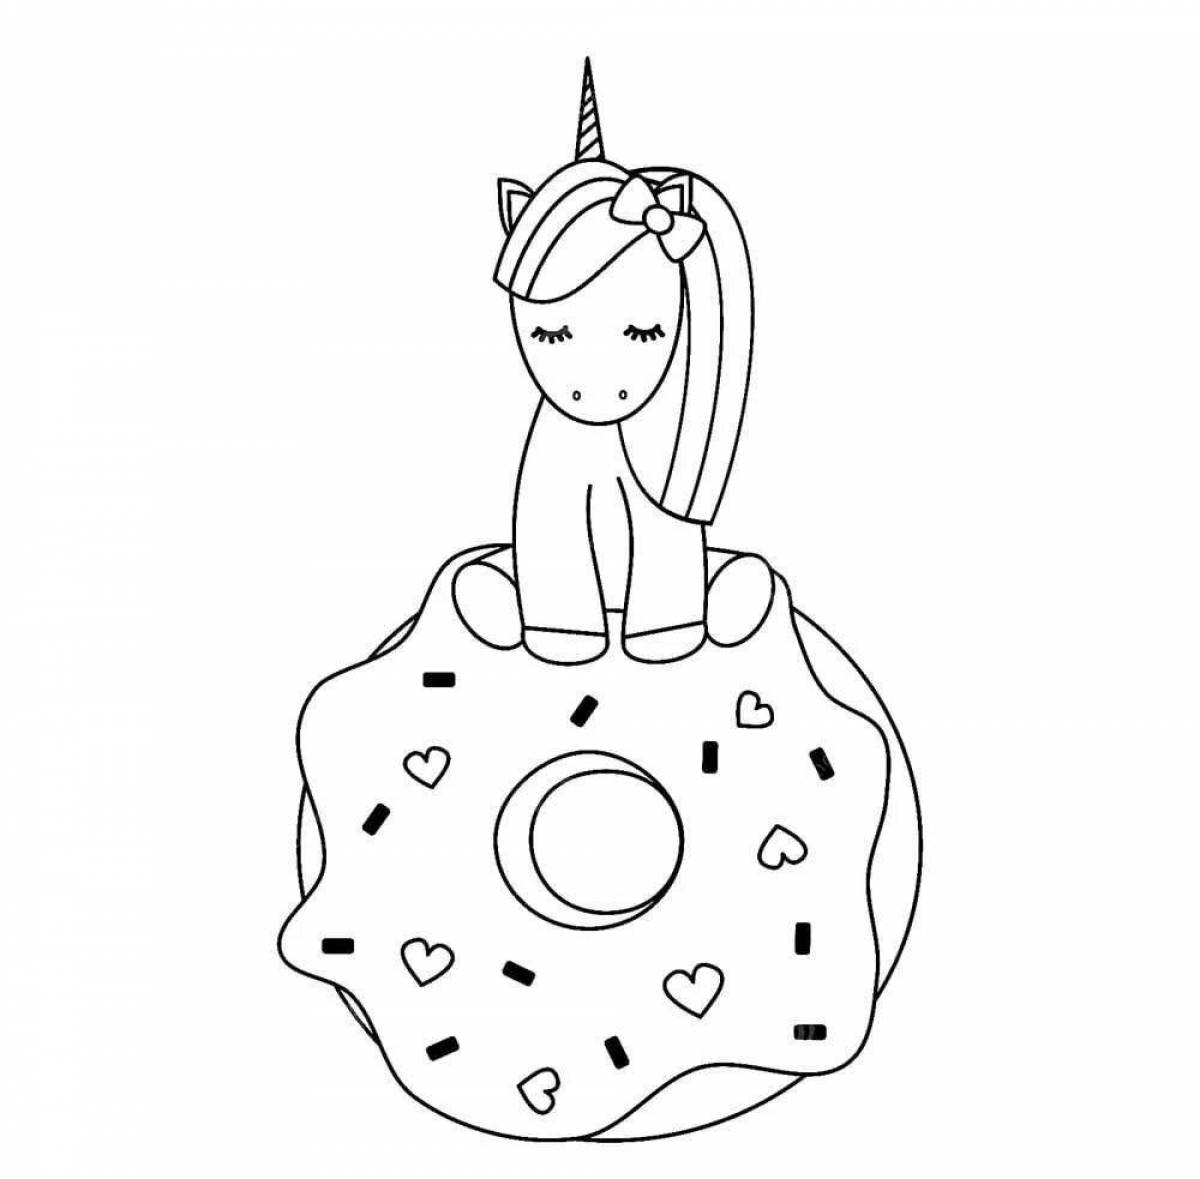 Unicorn donut glossy coloring book